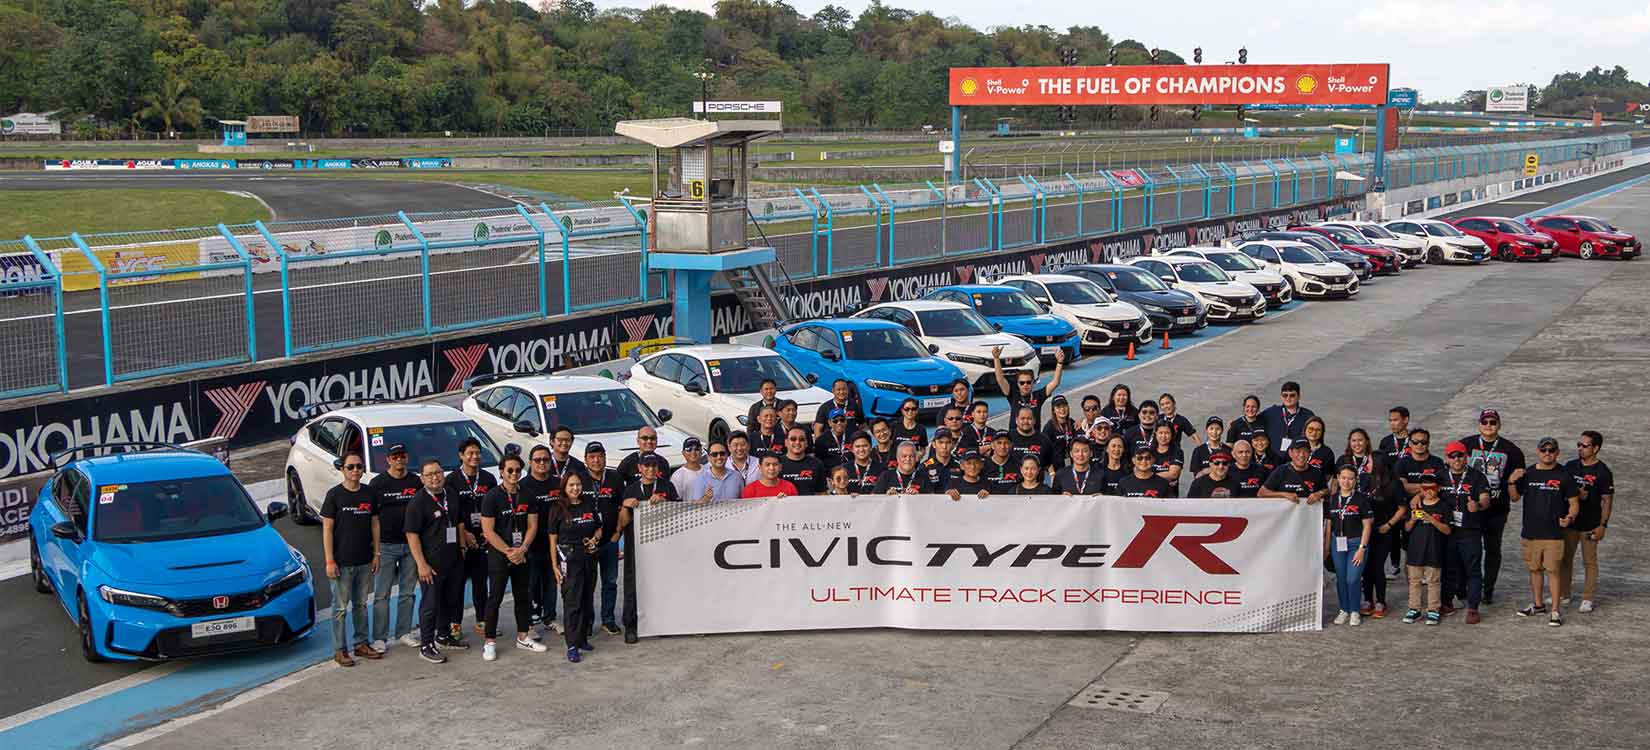 The All-New Honda Civic Type R showcases racetrack-proven engineering at the Clark International Speedway